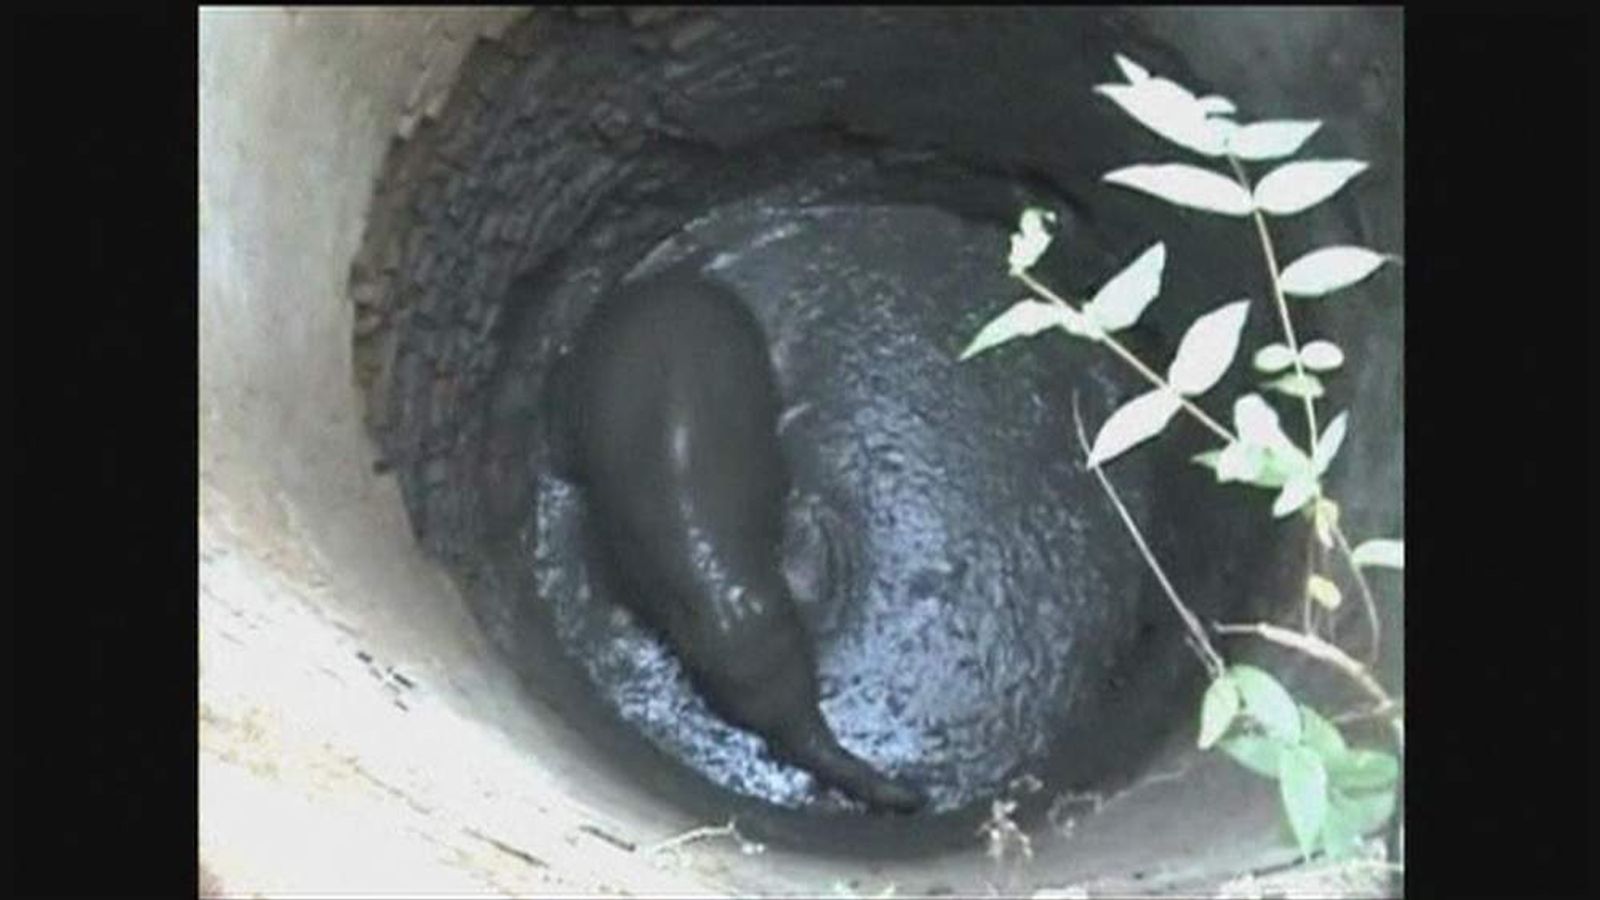 elephant rescue from well